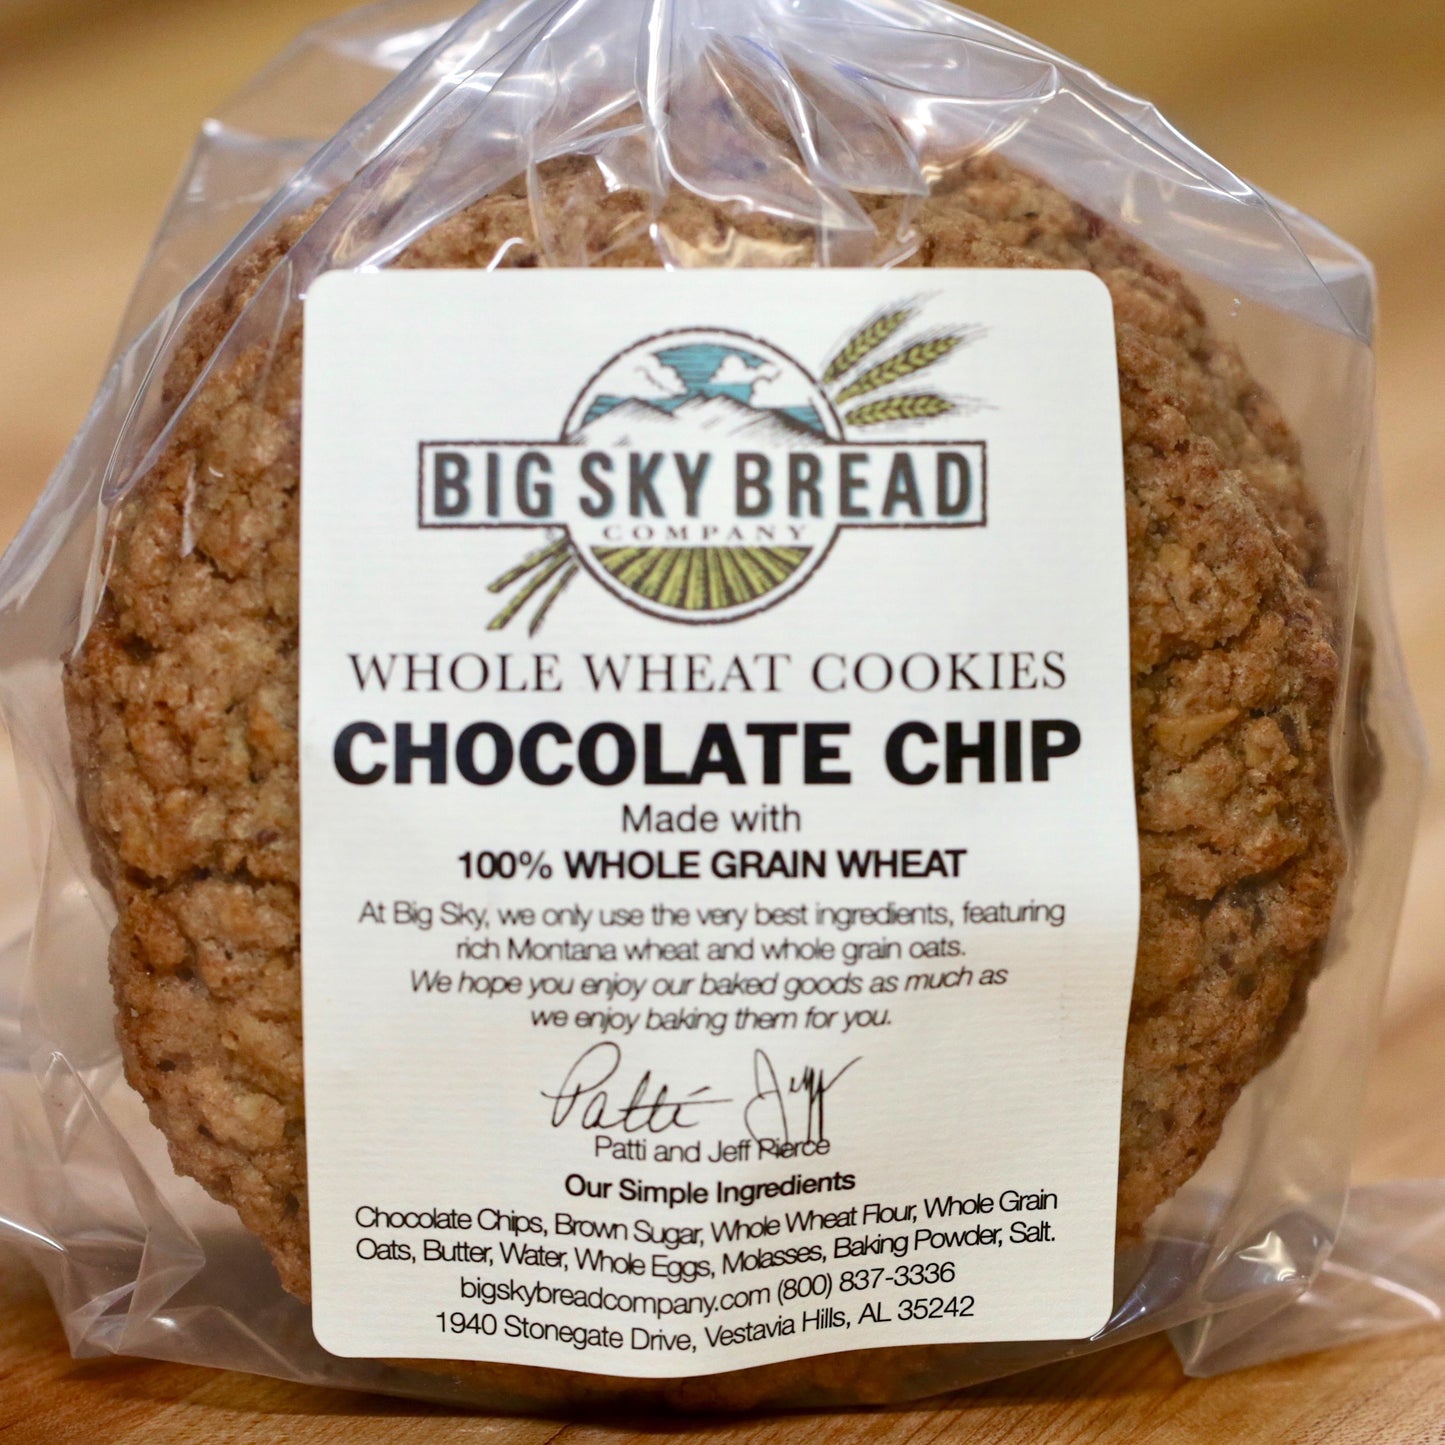 Soon to be world famous! Our whole wheat cookies are made with the best ingredients available, whole grain oats, Montana wheat flour, pure cream butter, molasses, and loaded with chocolate chips. Our best selling cookie! Big Sky Bread Company Whole Wheat Cookies